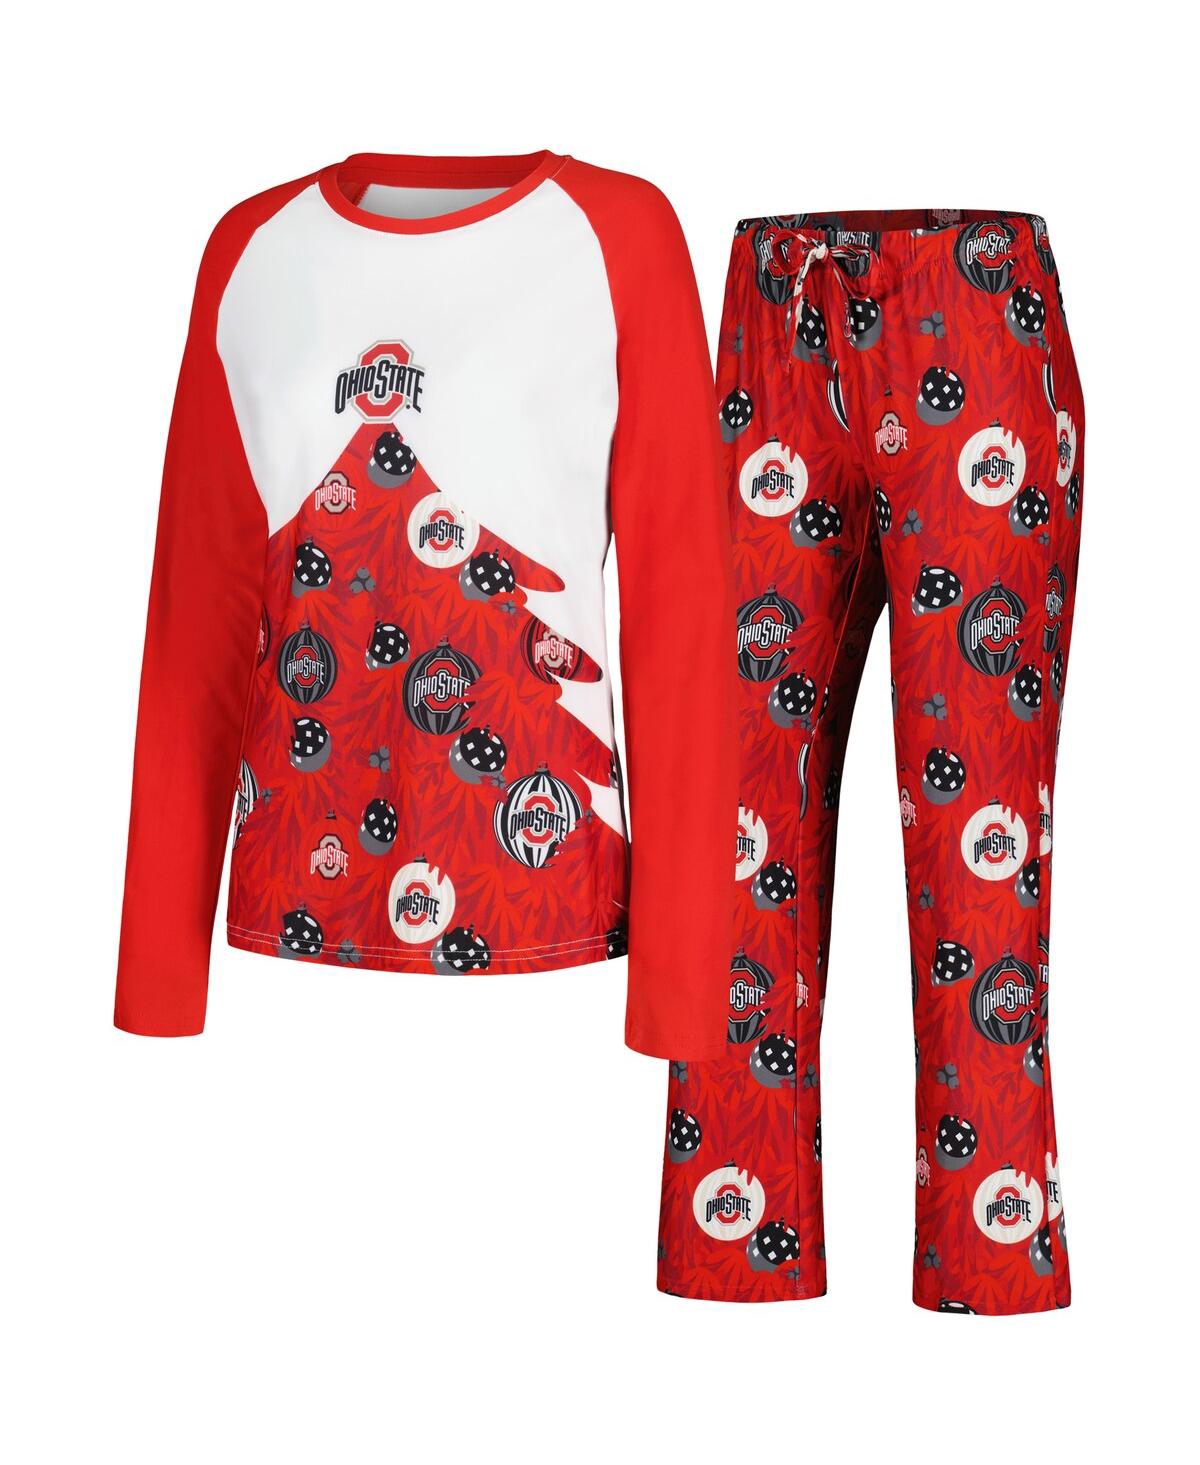 Women's Concepts Sport Scarlet Ohio State Buckeyes Tinsel Ugly Sweater Long Sleeve T-shirt and Pants Sleep Set - Scarlet